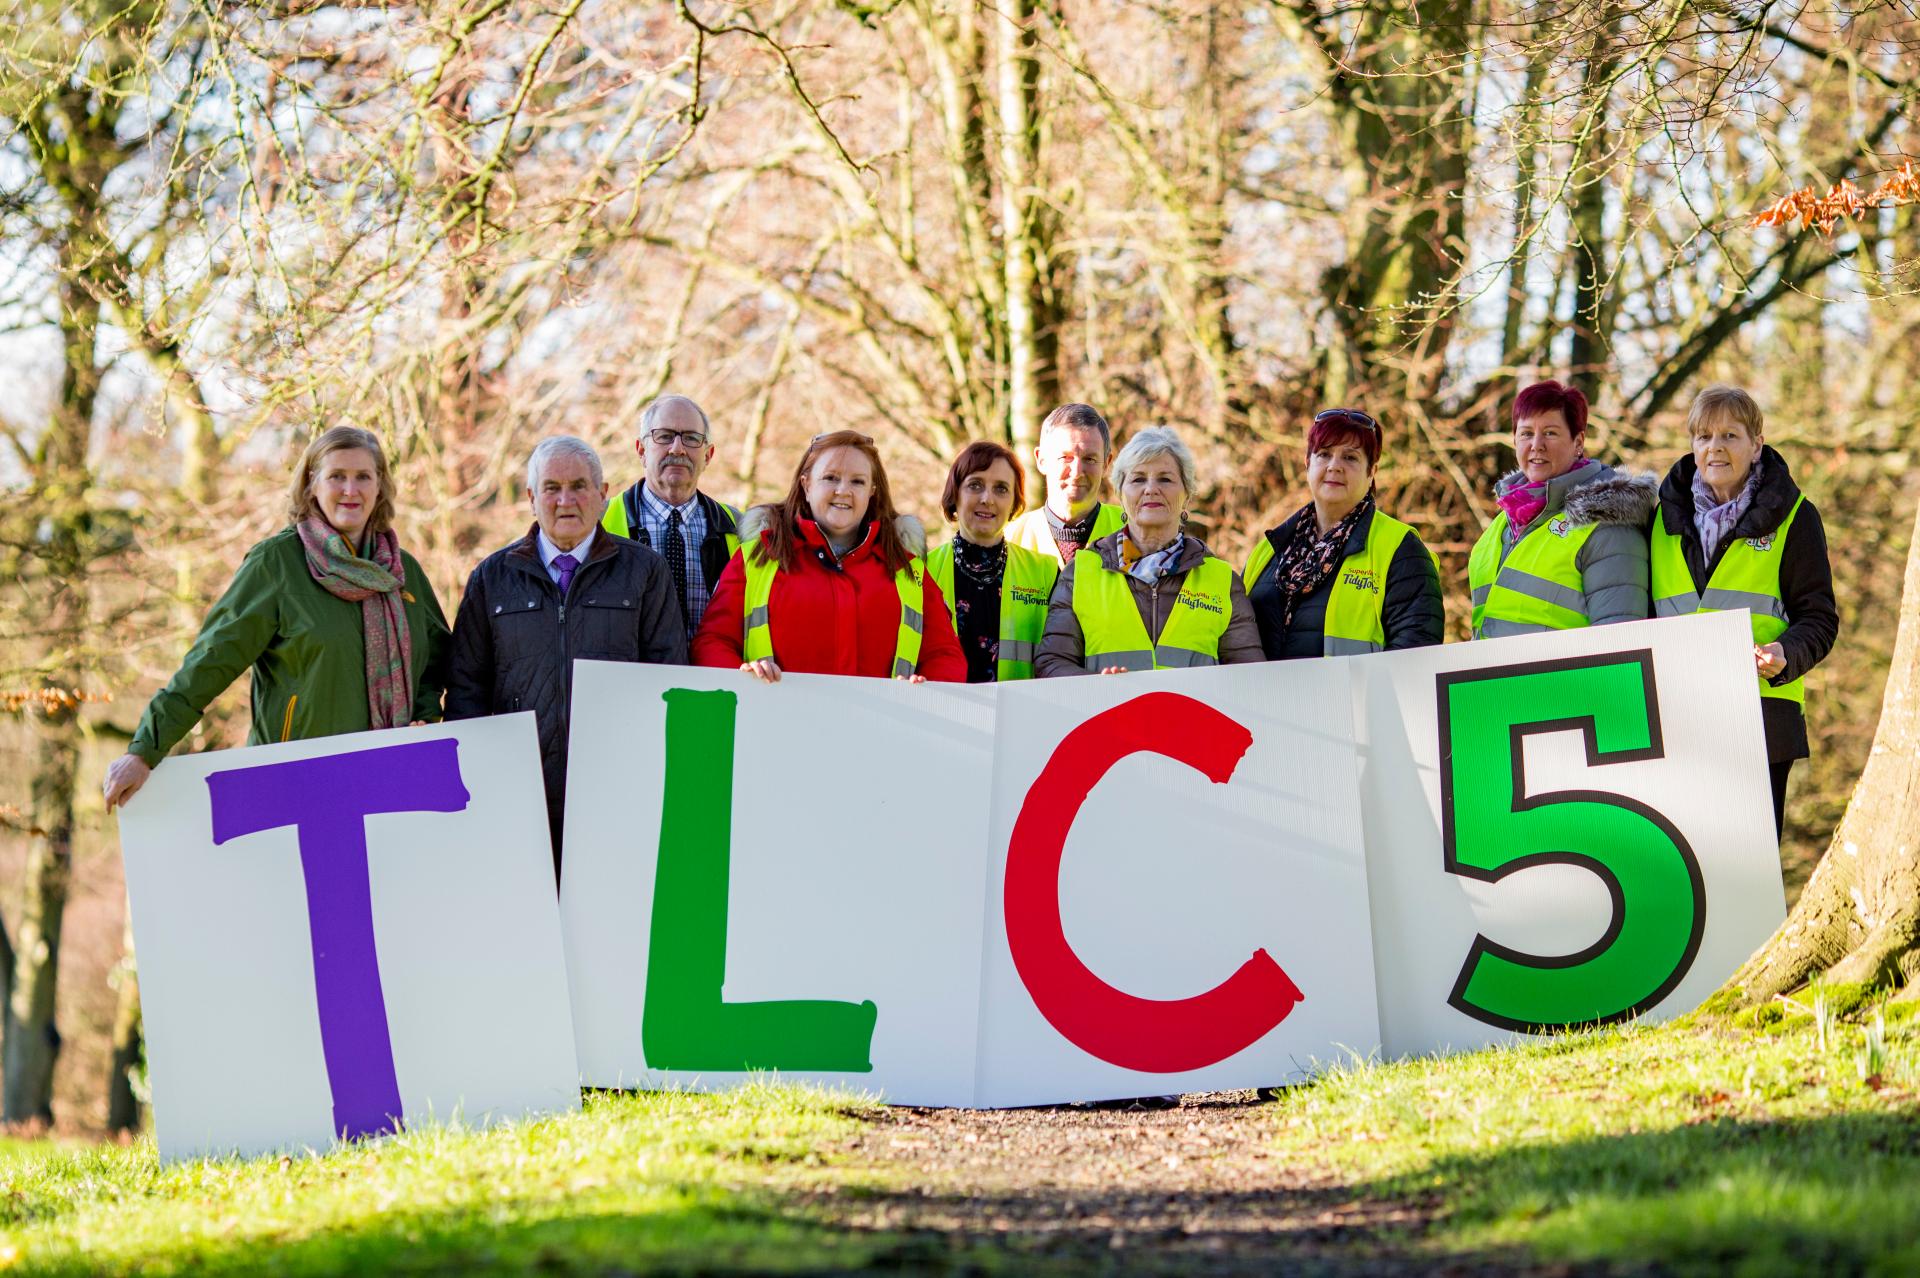 TLC5 launched by a group of volunteers